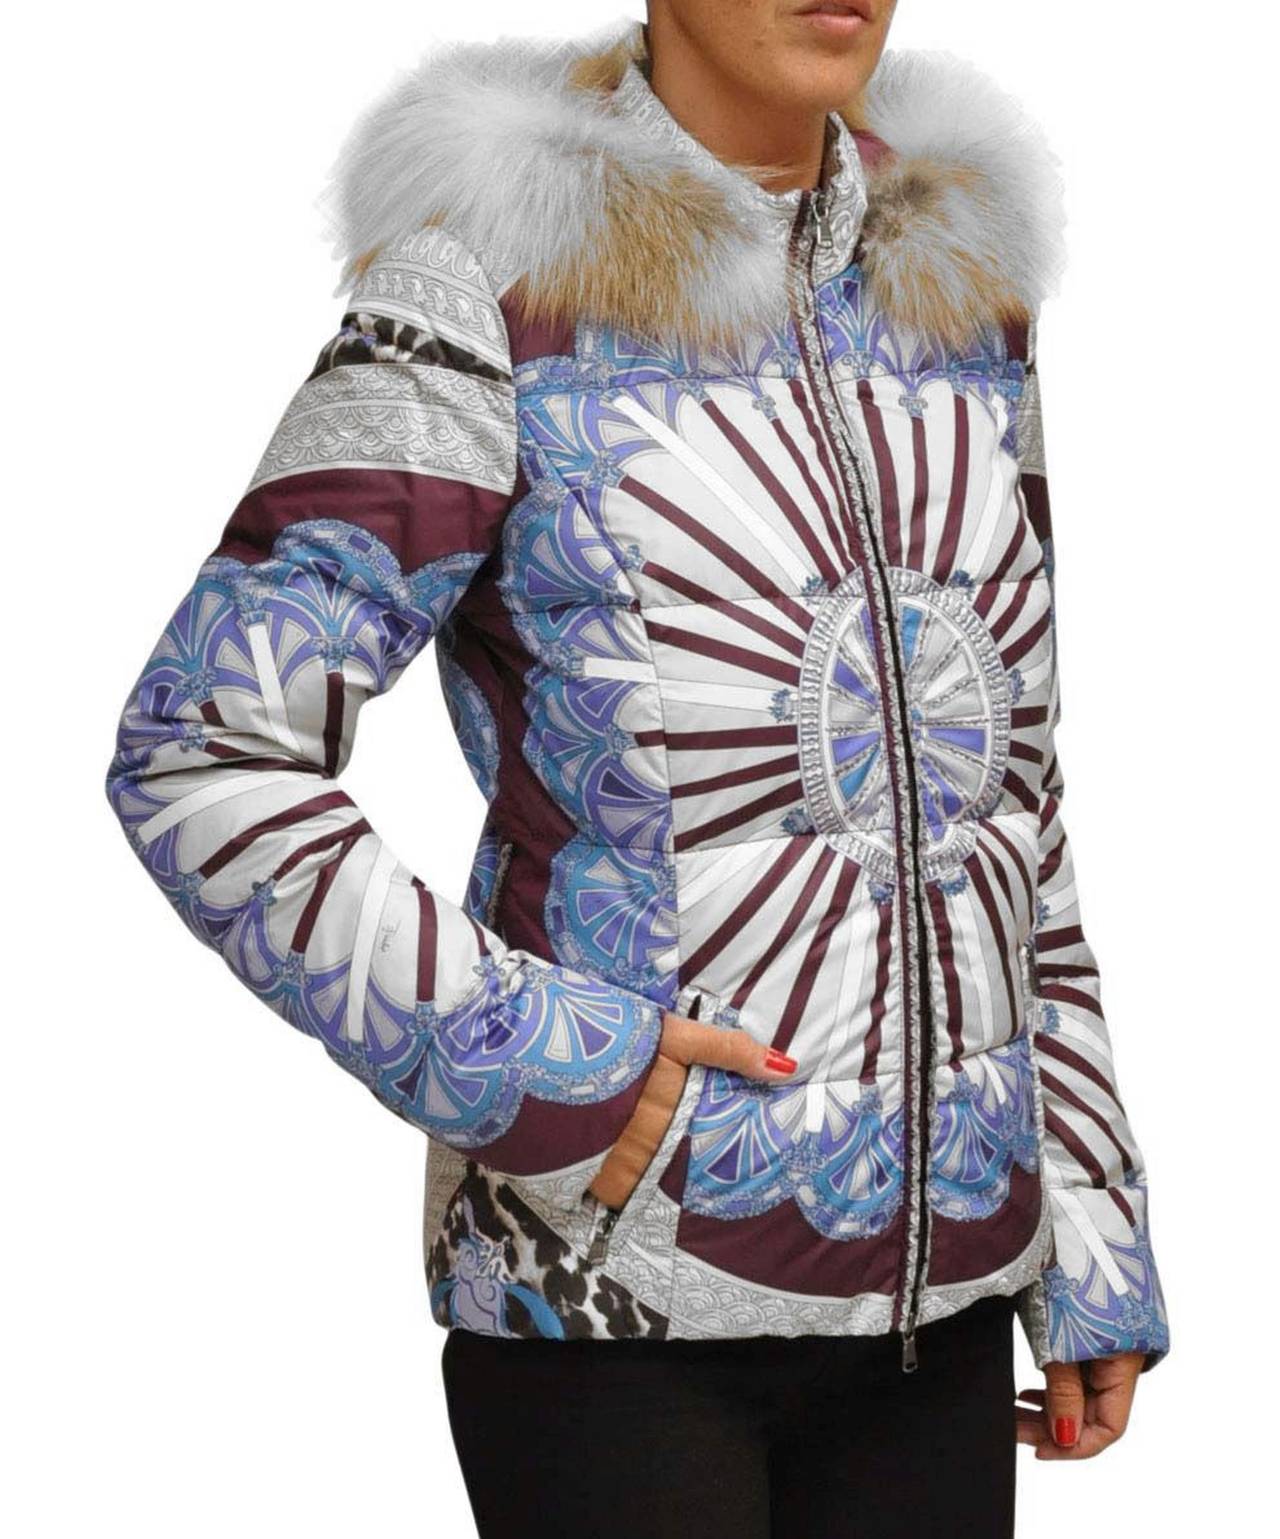 Sensational and Very Rare Emilio Pucci Silk Down Jacket with detachable Fox Fur Hood. From Autumn/Winter 2012, this jacket was a limited edition that was sold out everywhere, and to my knowledge this is the only one available for sale in the world.